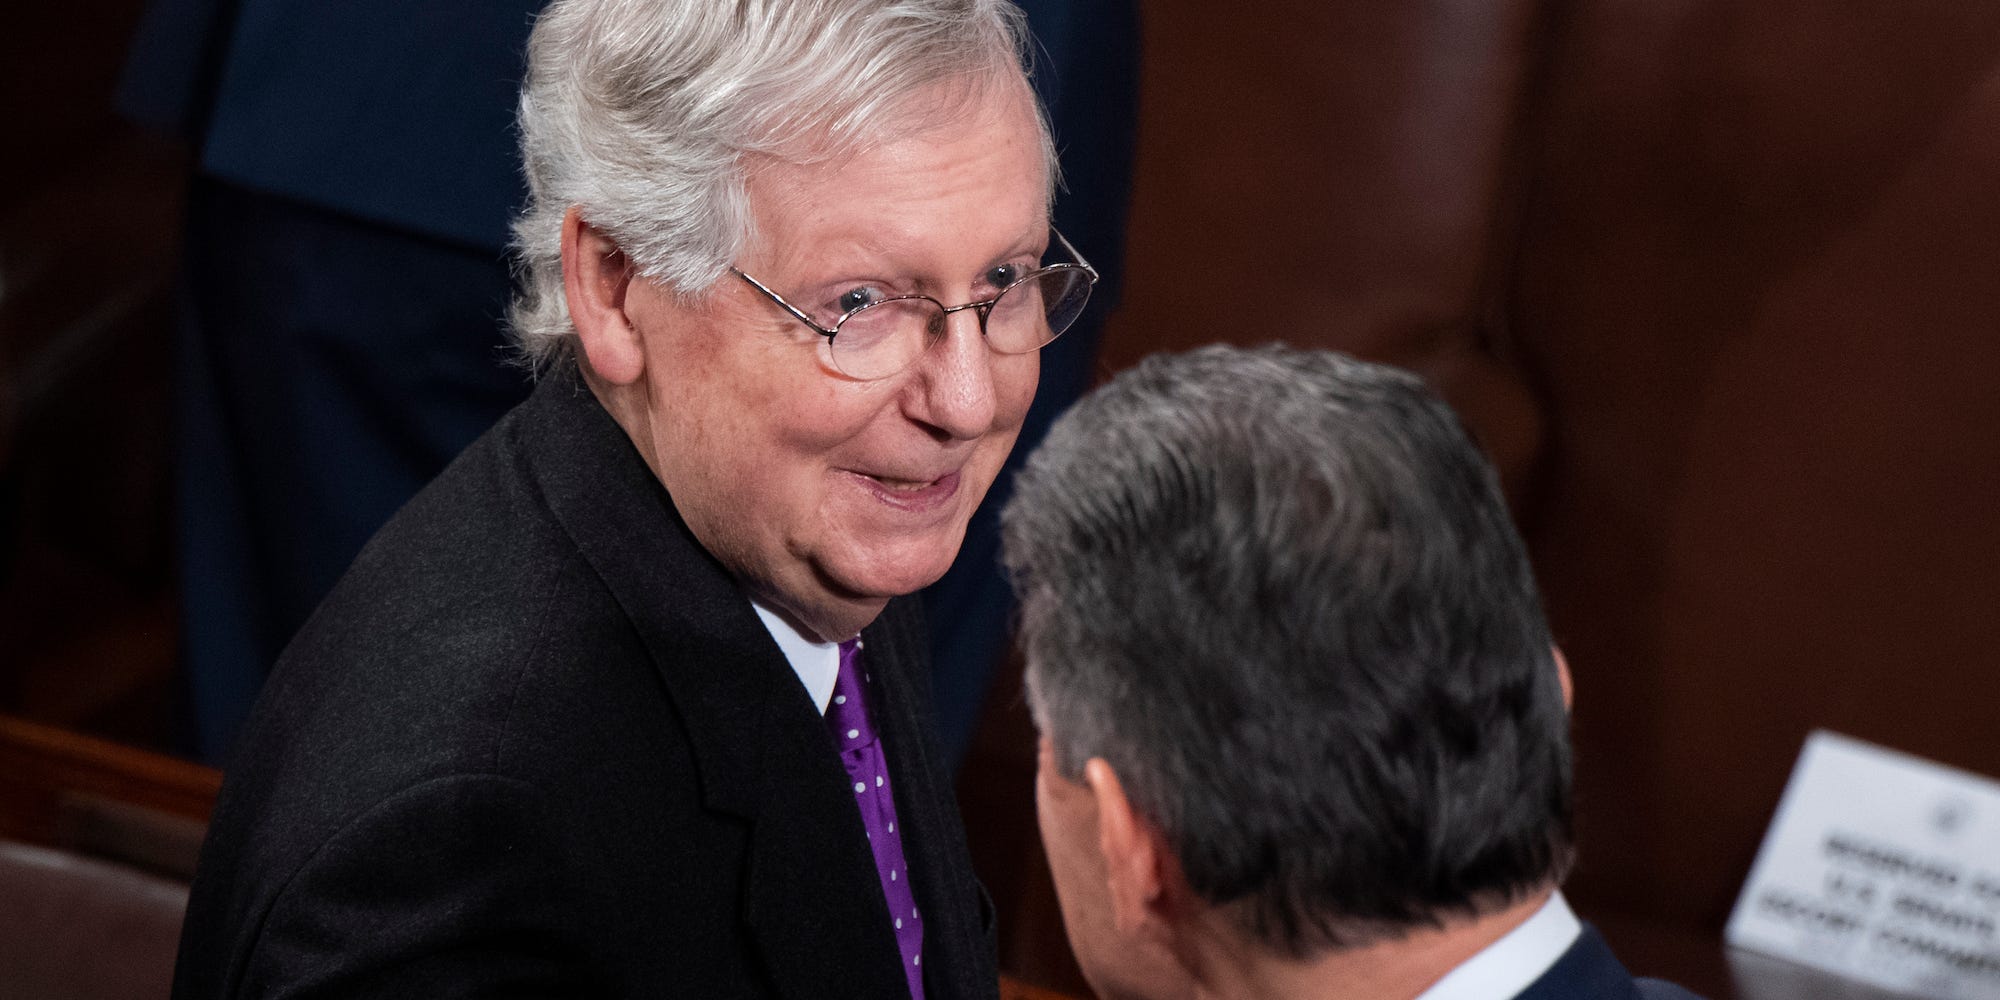 Sens. Mitch McConnell and Joe Manchin at former President Donald Trump’s State of the Union address on February 4, 2020.